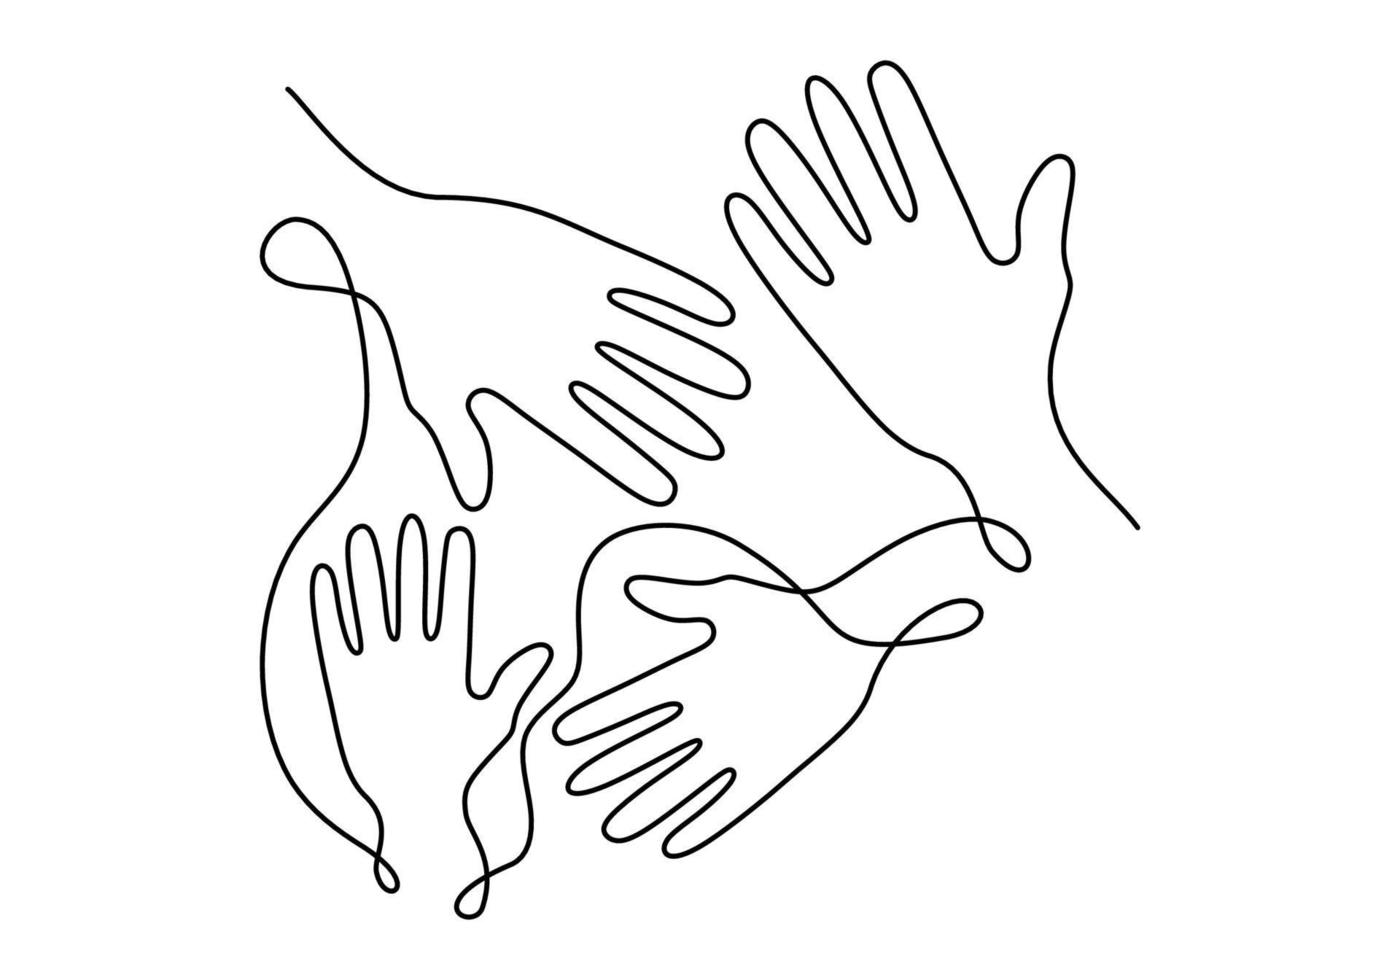 Continuous one line drawing of abstract opened four hands together vector